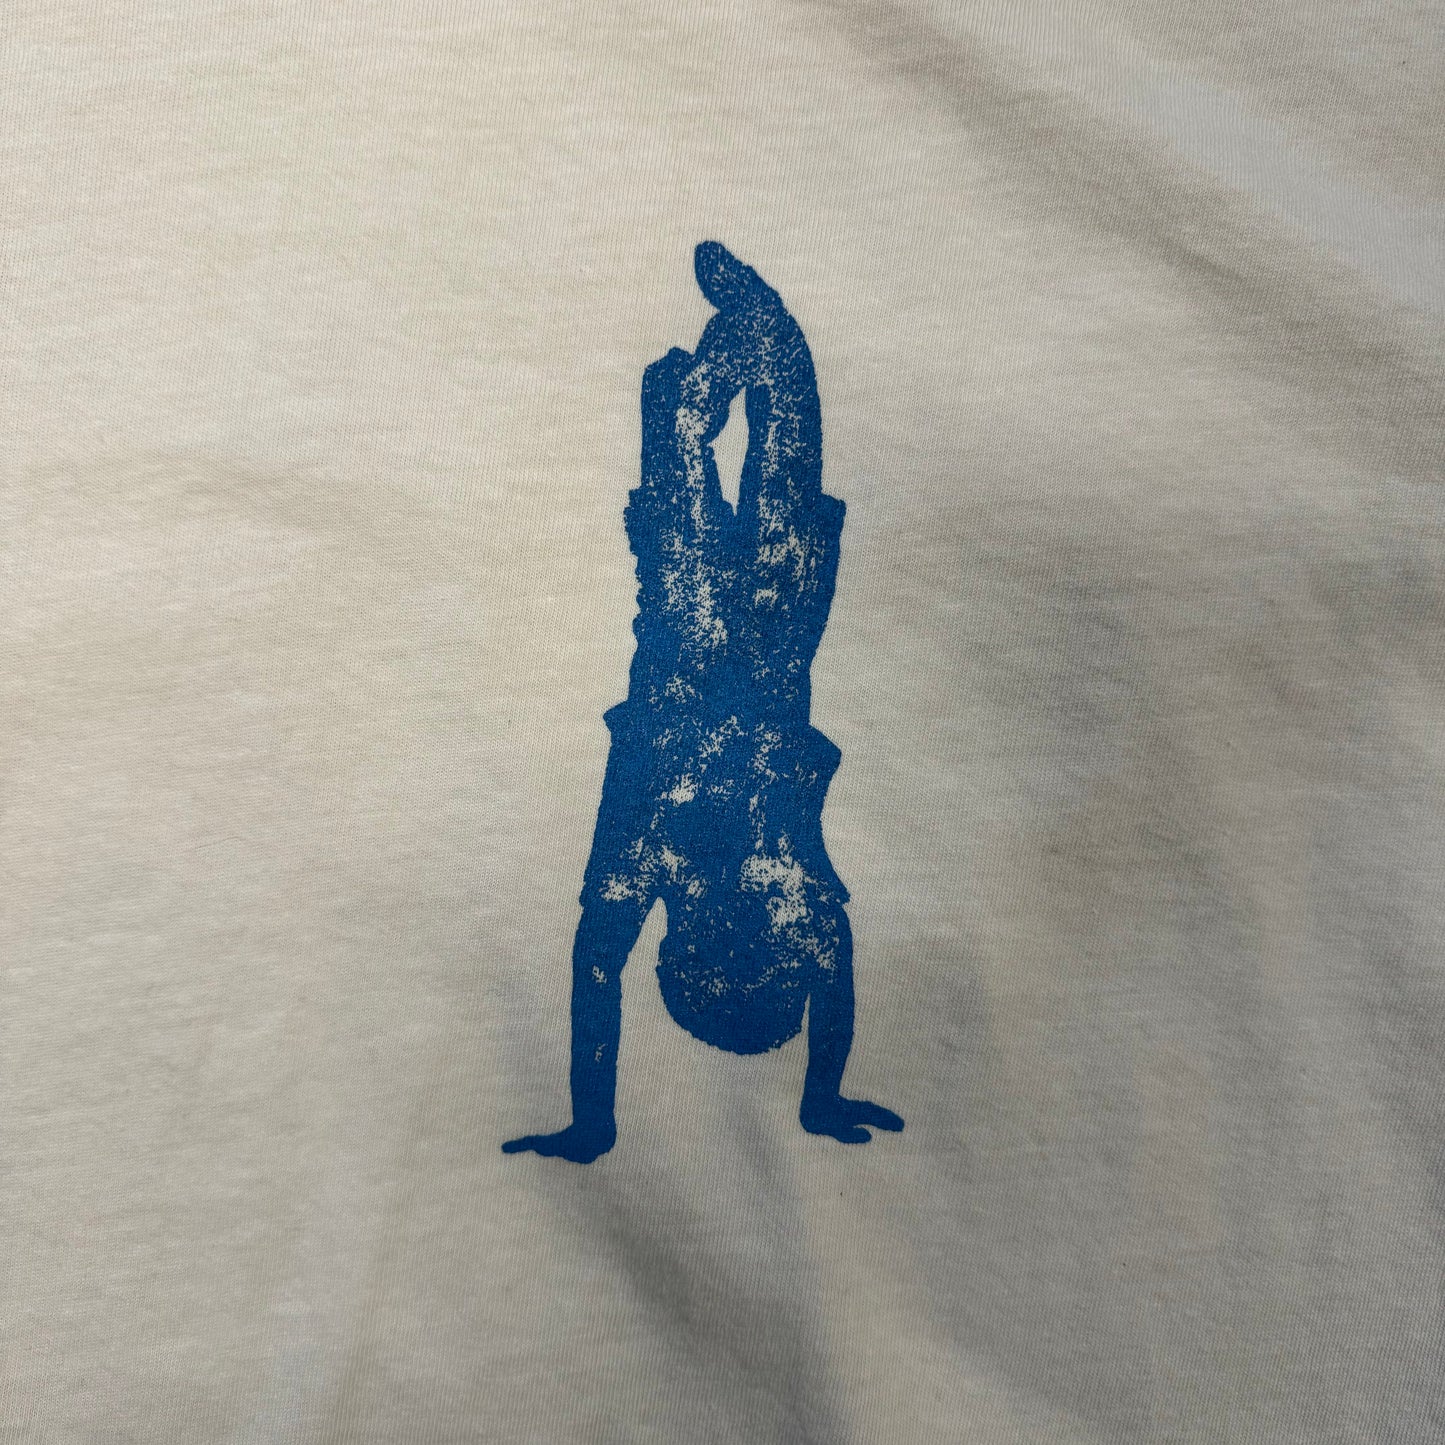 closeup of blue person doing a handstand on white T-shirt